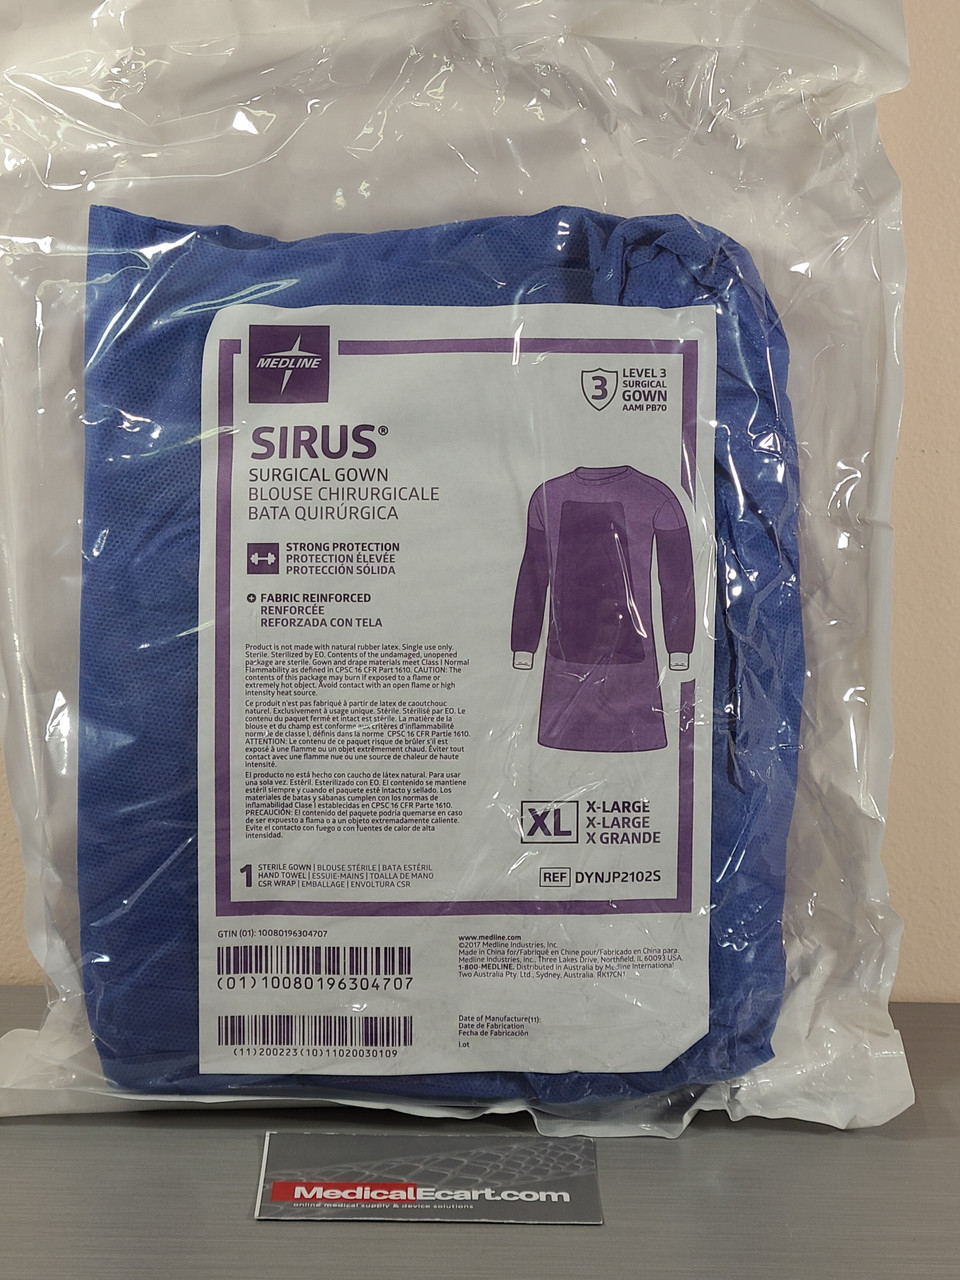 Medtecs Disposable Gowns Receive FDA Clearance - Medtecs Group